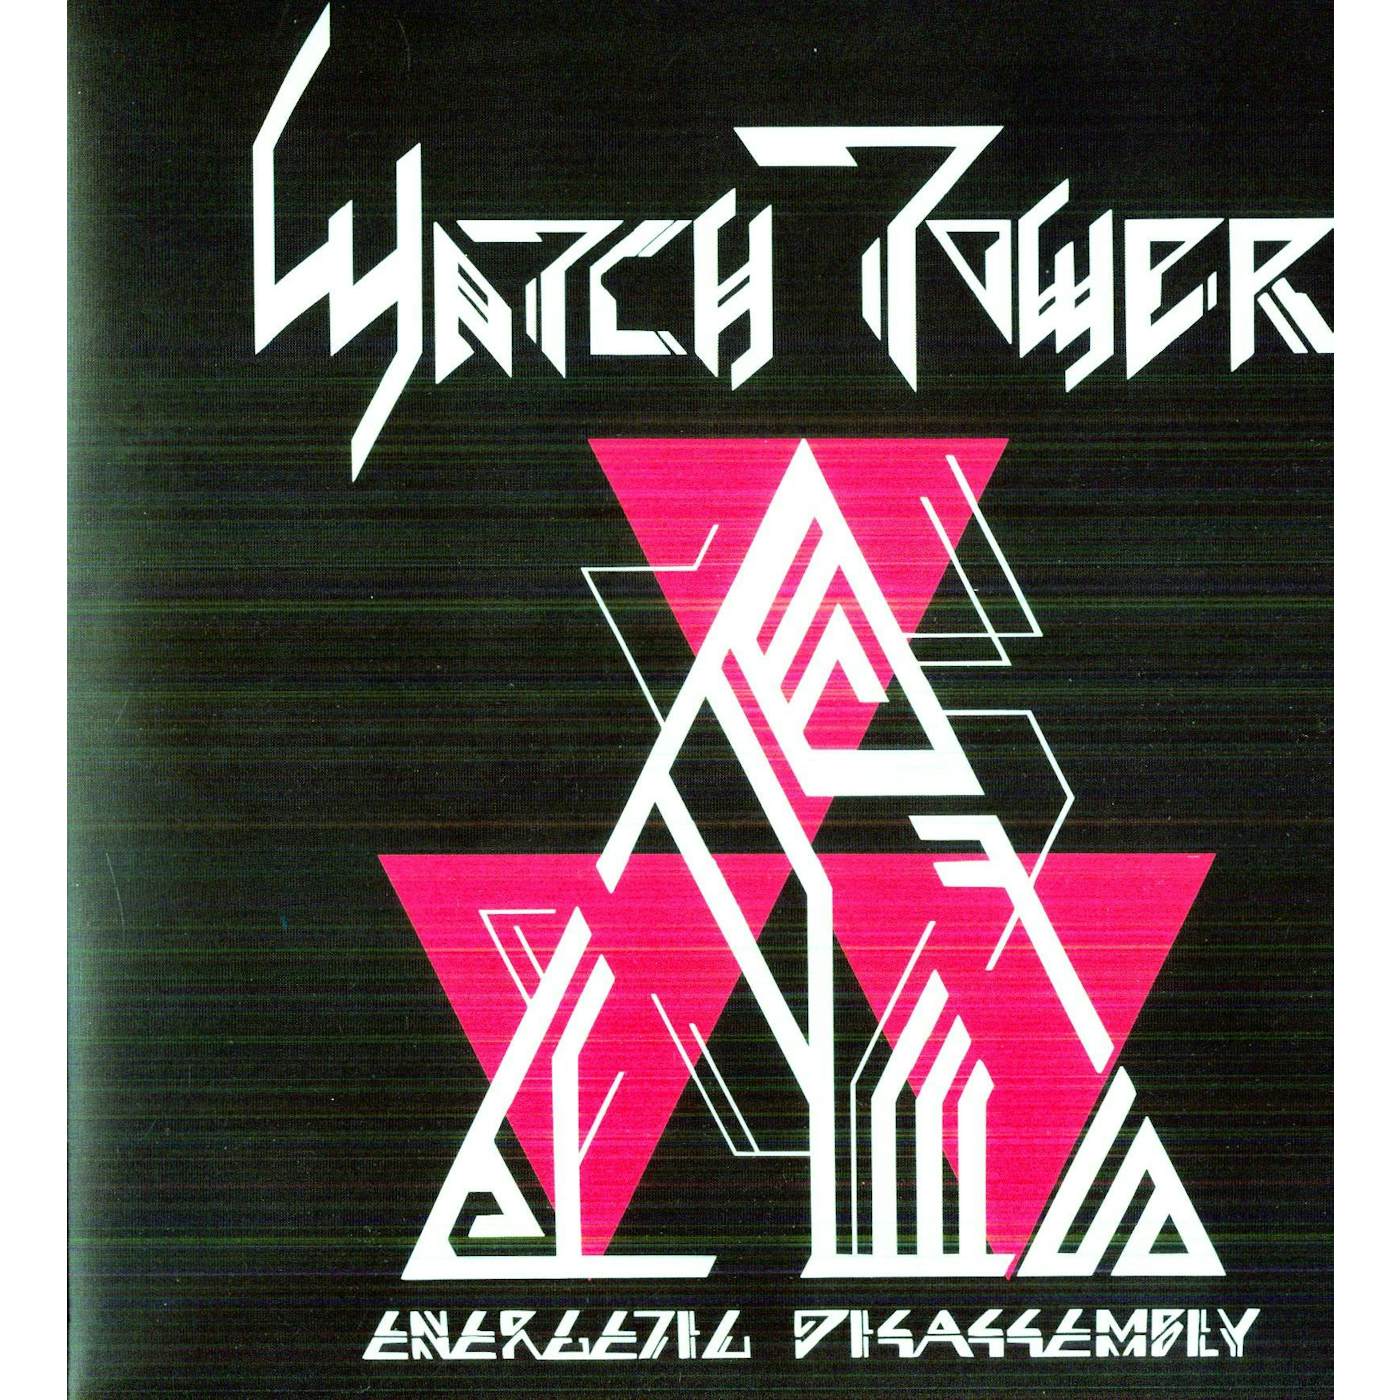 Watchtower Energetic Disassembly Vinyl Record